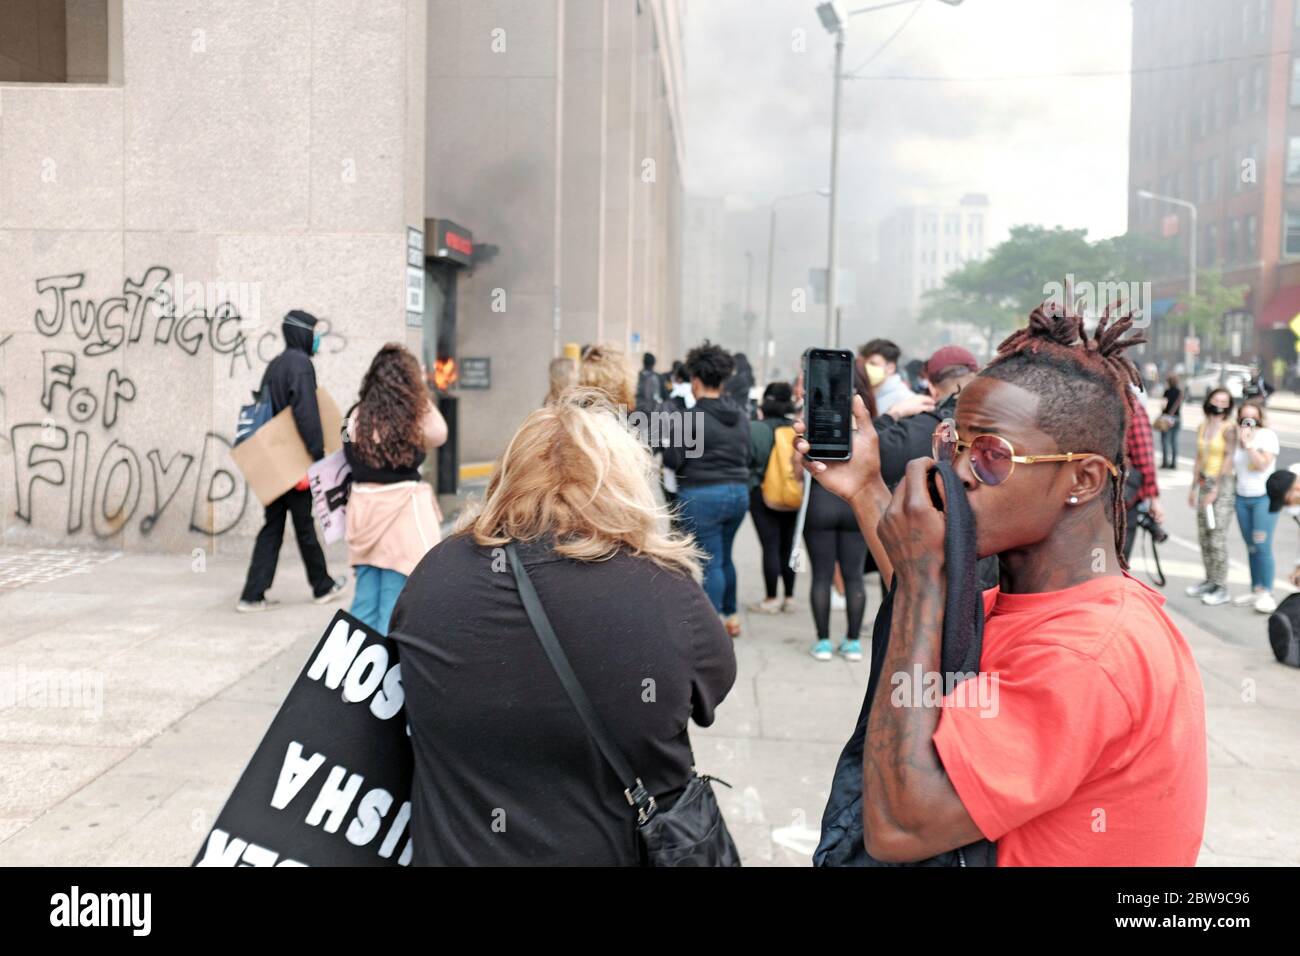 A protester covers their face from smoke and tear gas in downtown Cleveland, Ohio, USA during a major demonstration against police brutality.  Thousands marched to the Justice Center where they had a standoff with police during which tear gas and pepper spray were used on demonstrators throughout the day.  The demonstration is one of many going on in the United States in response to injustice and racism which was sparked by the murder of George Floyd in the hands of police in Minneapolis. Stock Photo